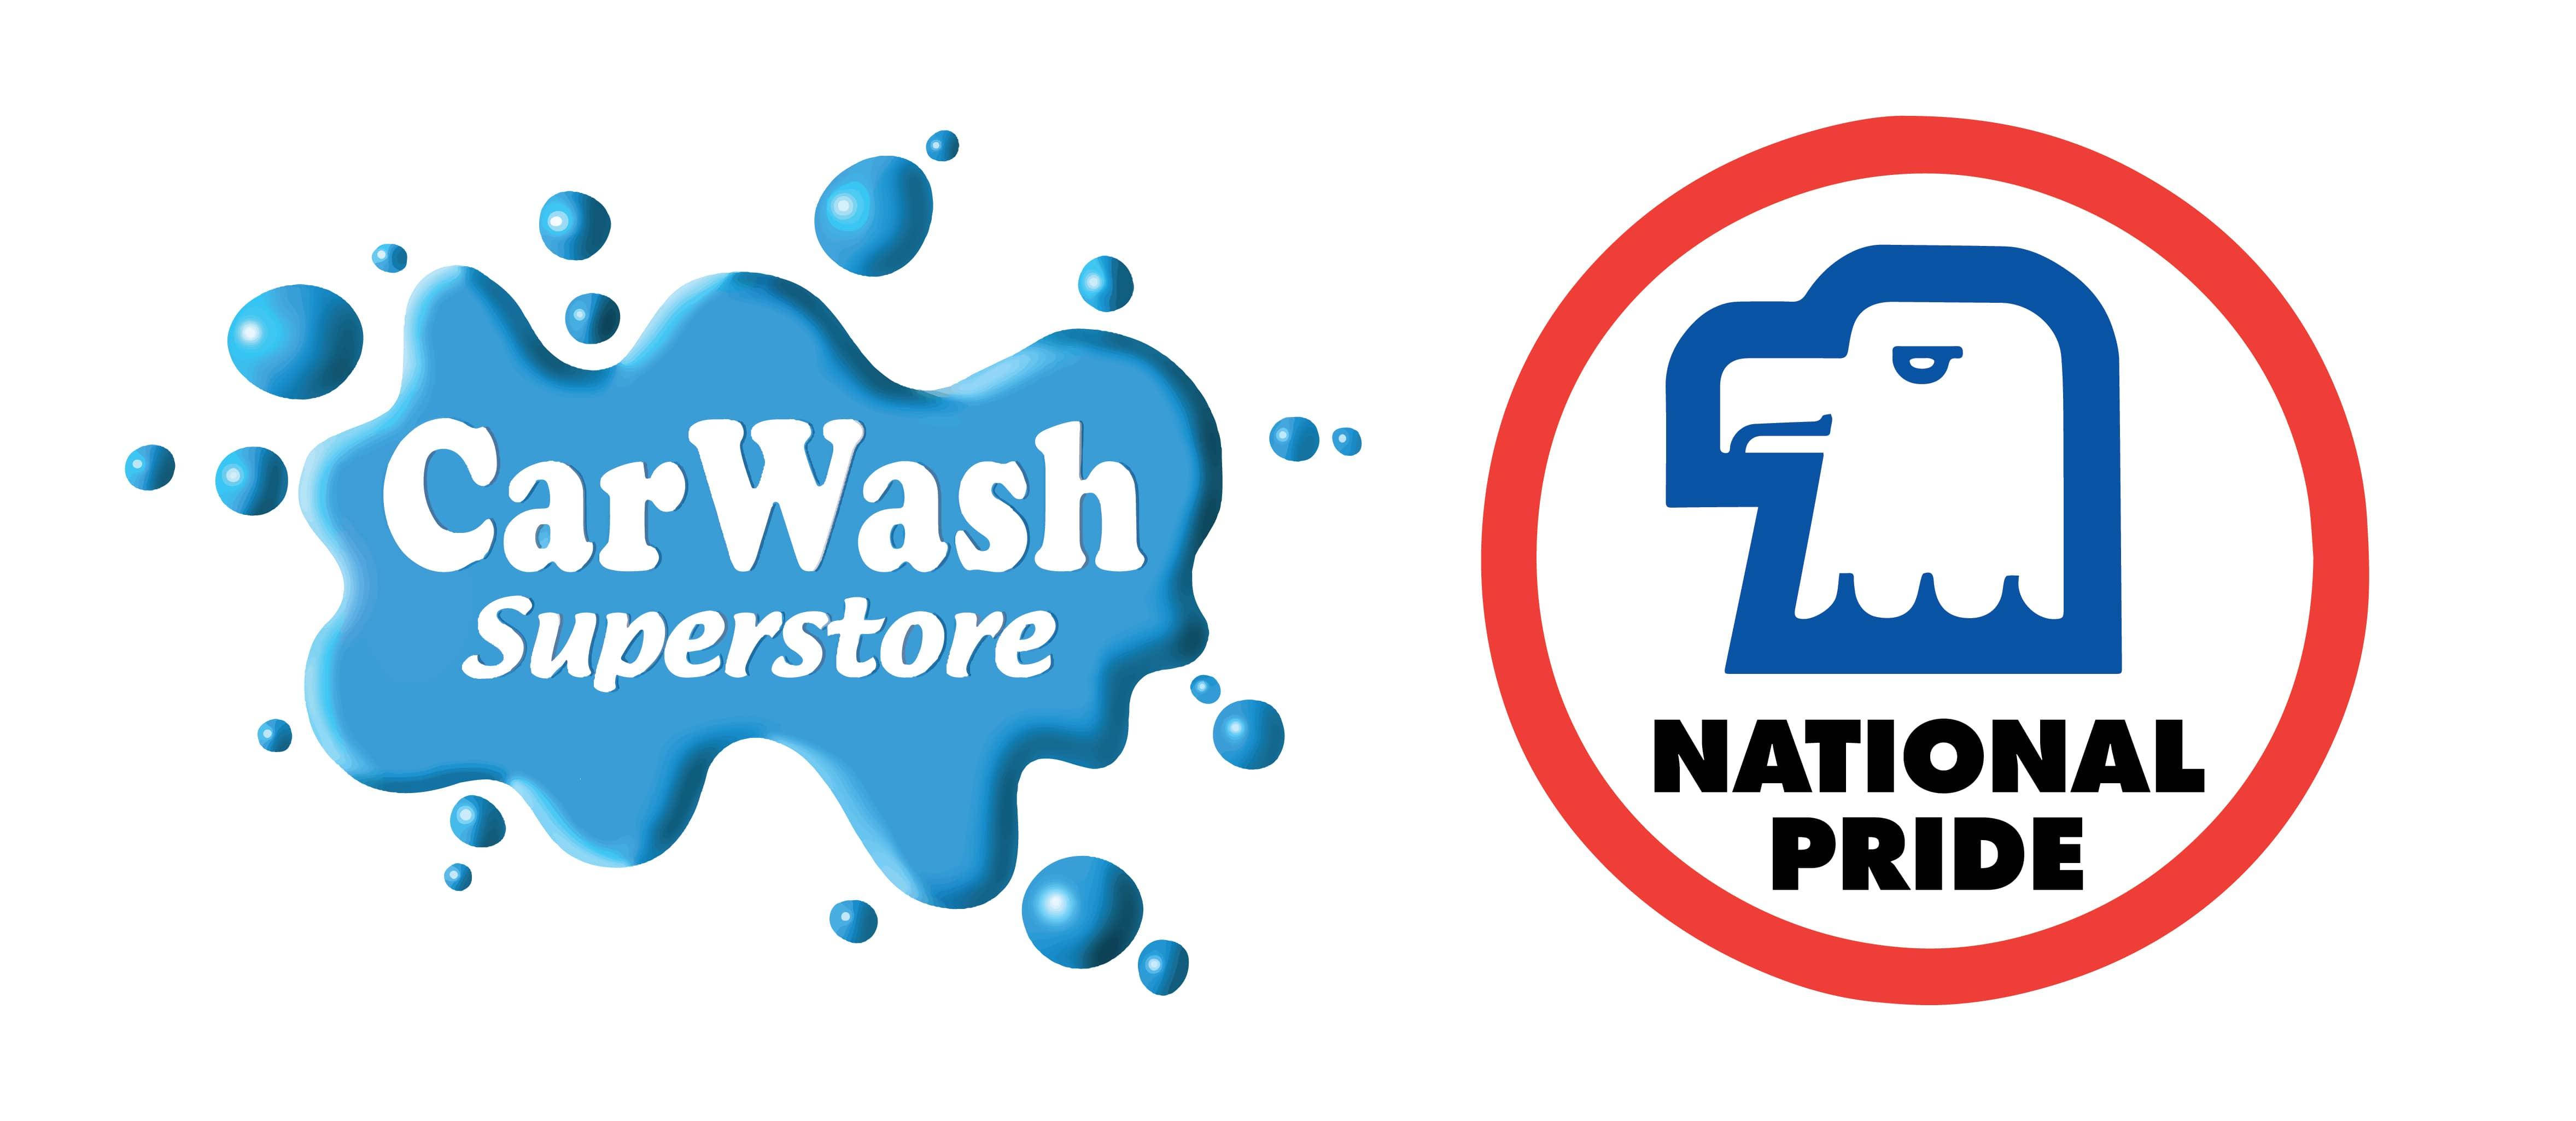 Your Car Wash Superstore